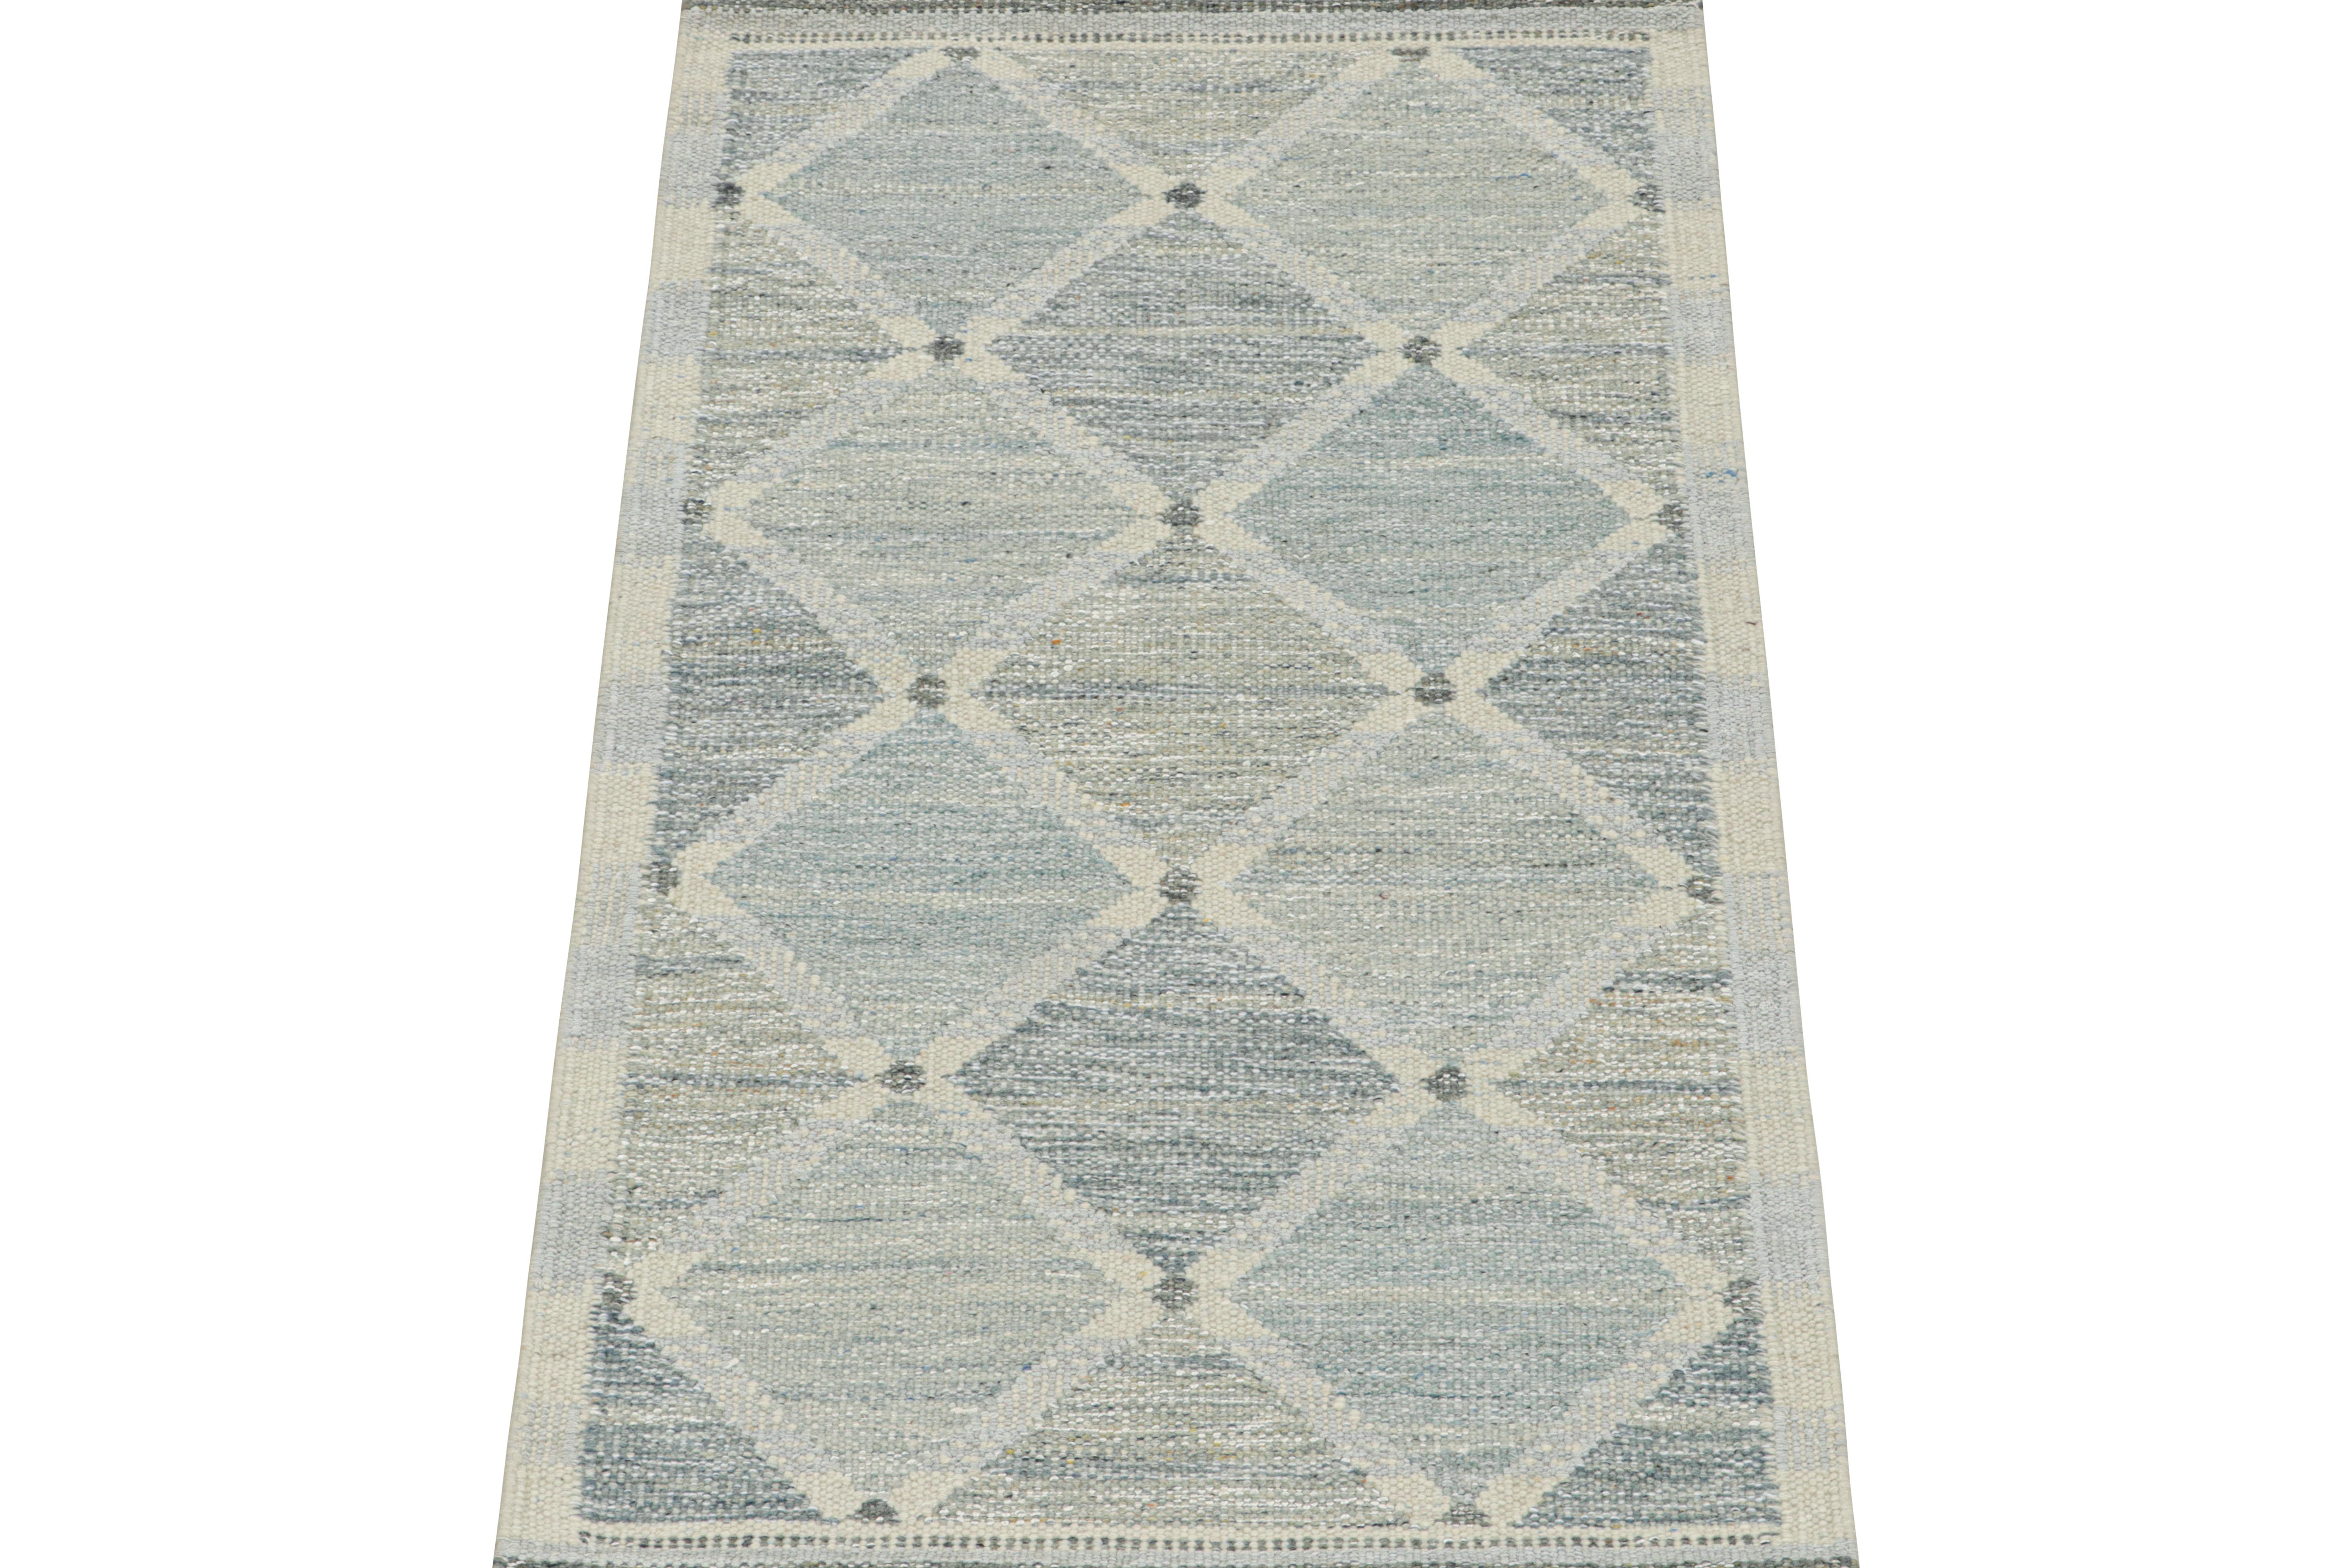 This 3x6 flat weave runner is a bold new addition to the Scandinavian Collection by Rug & Kilim. Handwoven in wool and natural yarns, its design reflects a contemporary take on mid-century Rollakans and Swedish Deco style.

On the Design:

This new